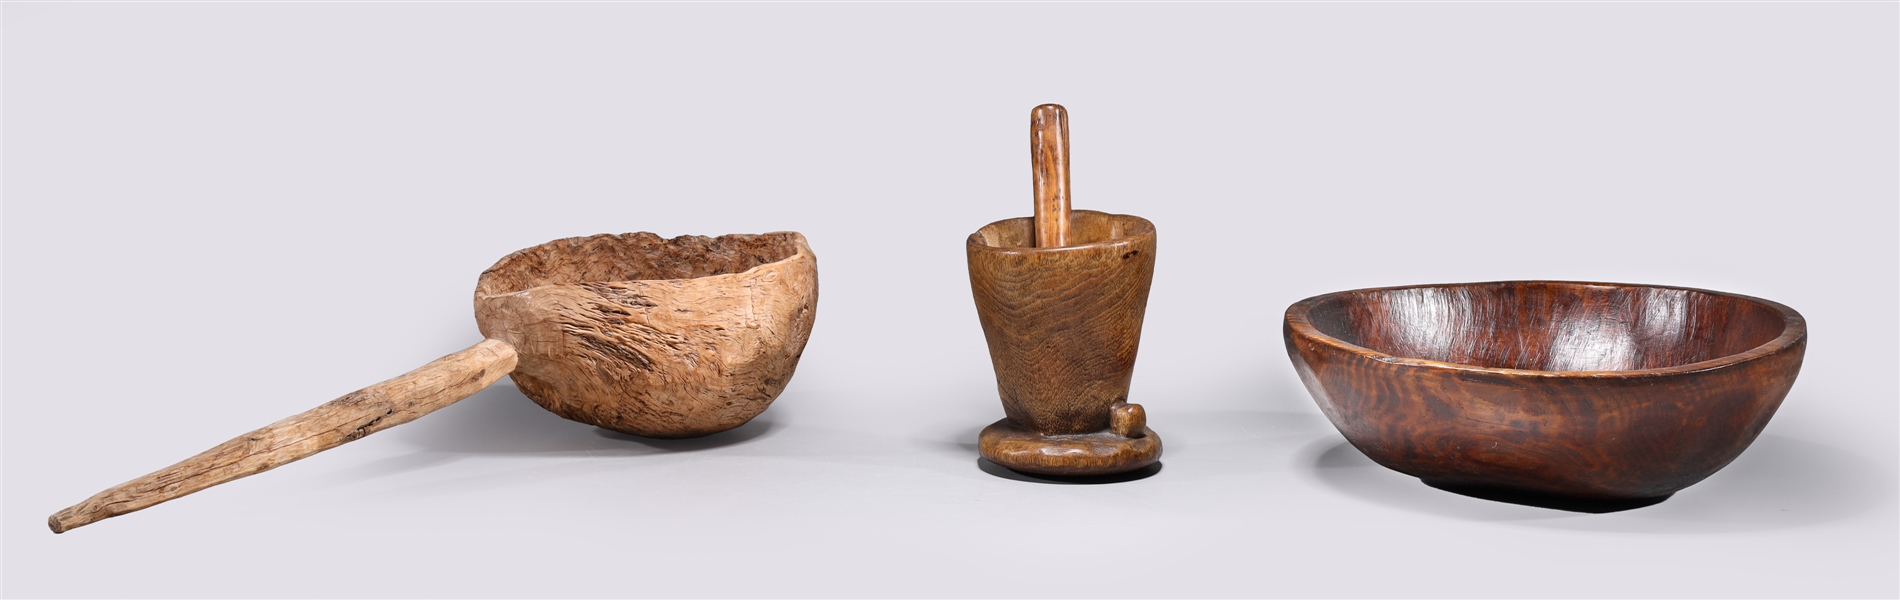 Group of three vintage wooden objects 368655